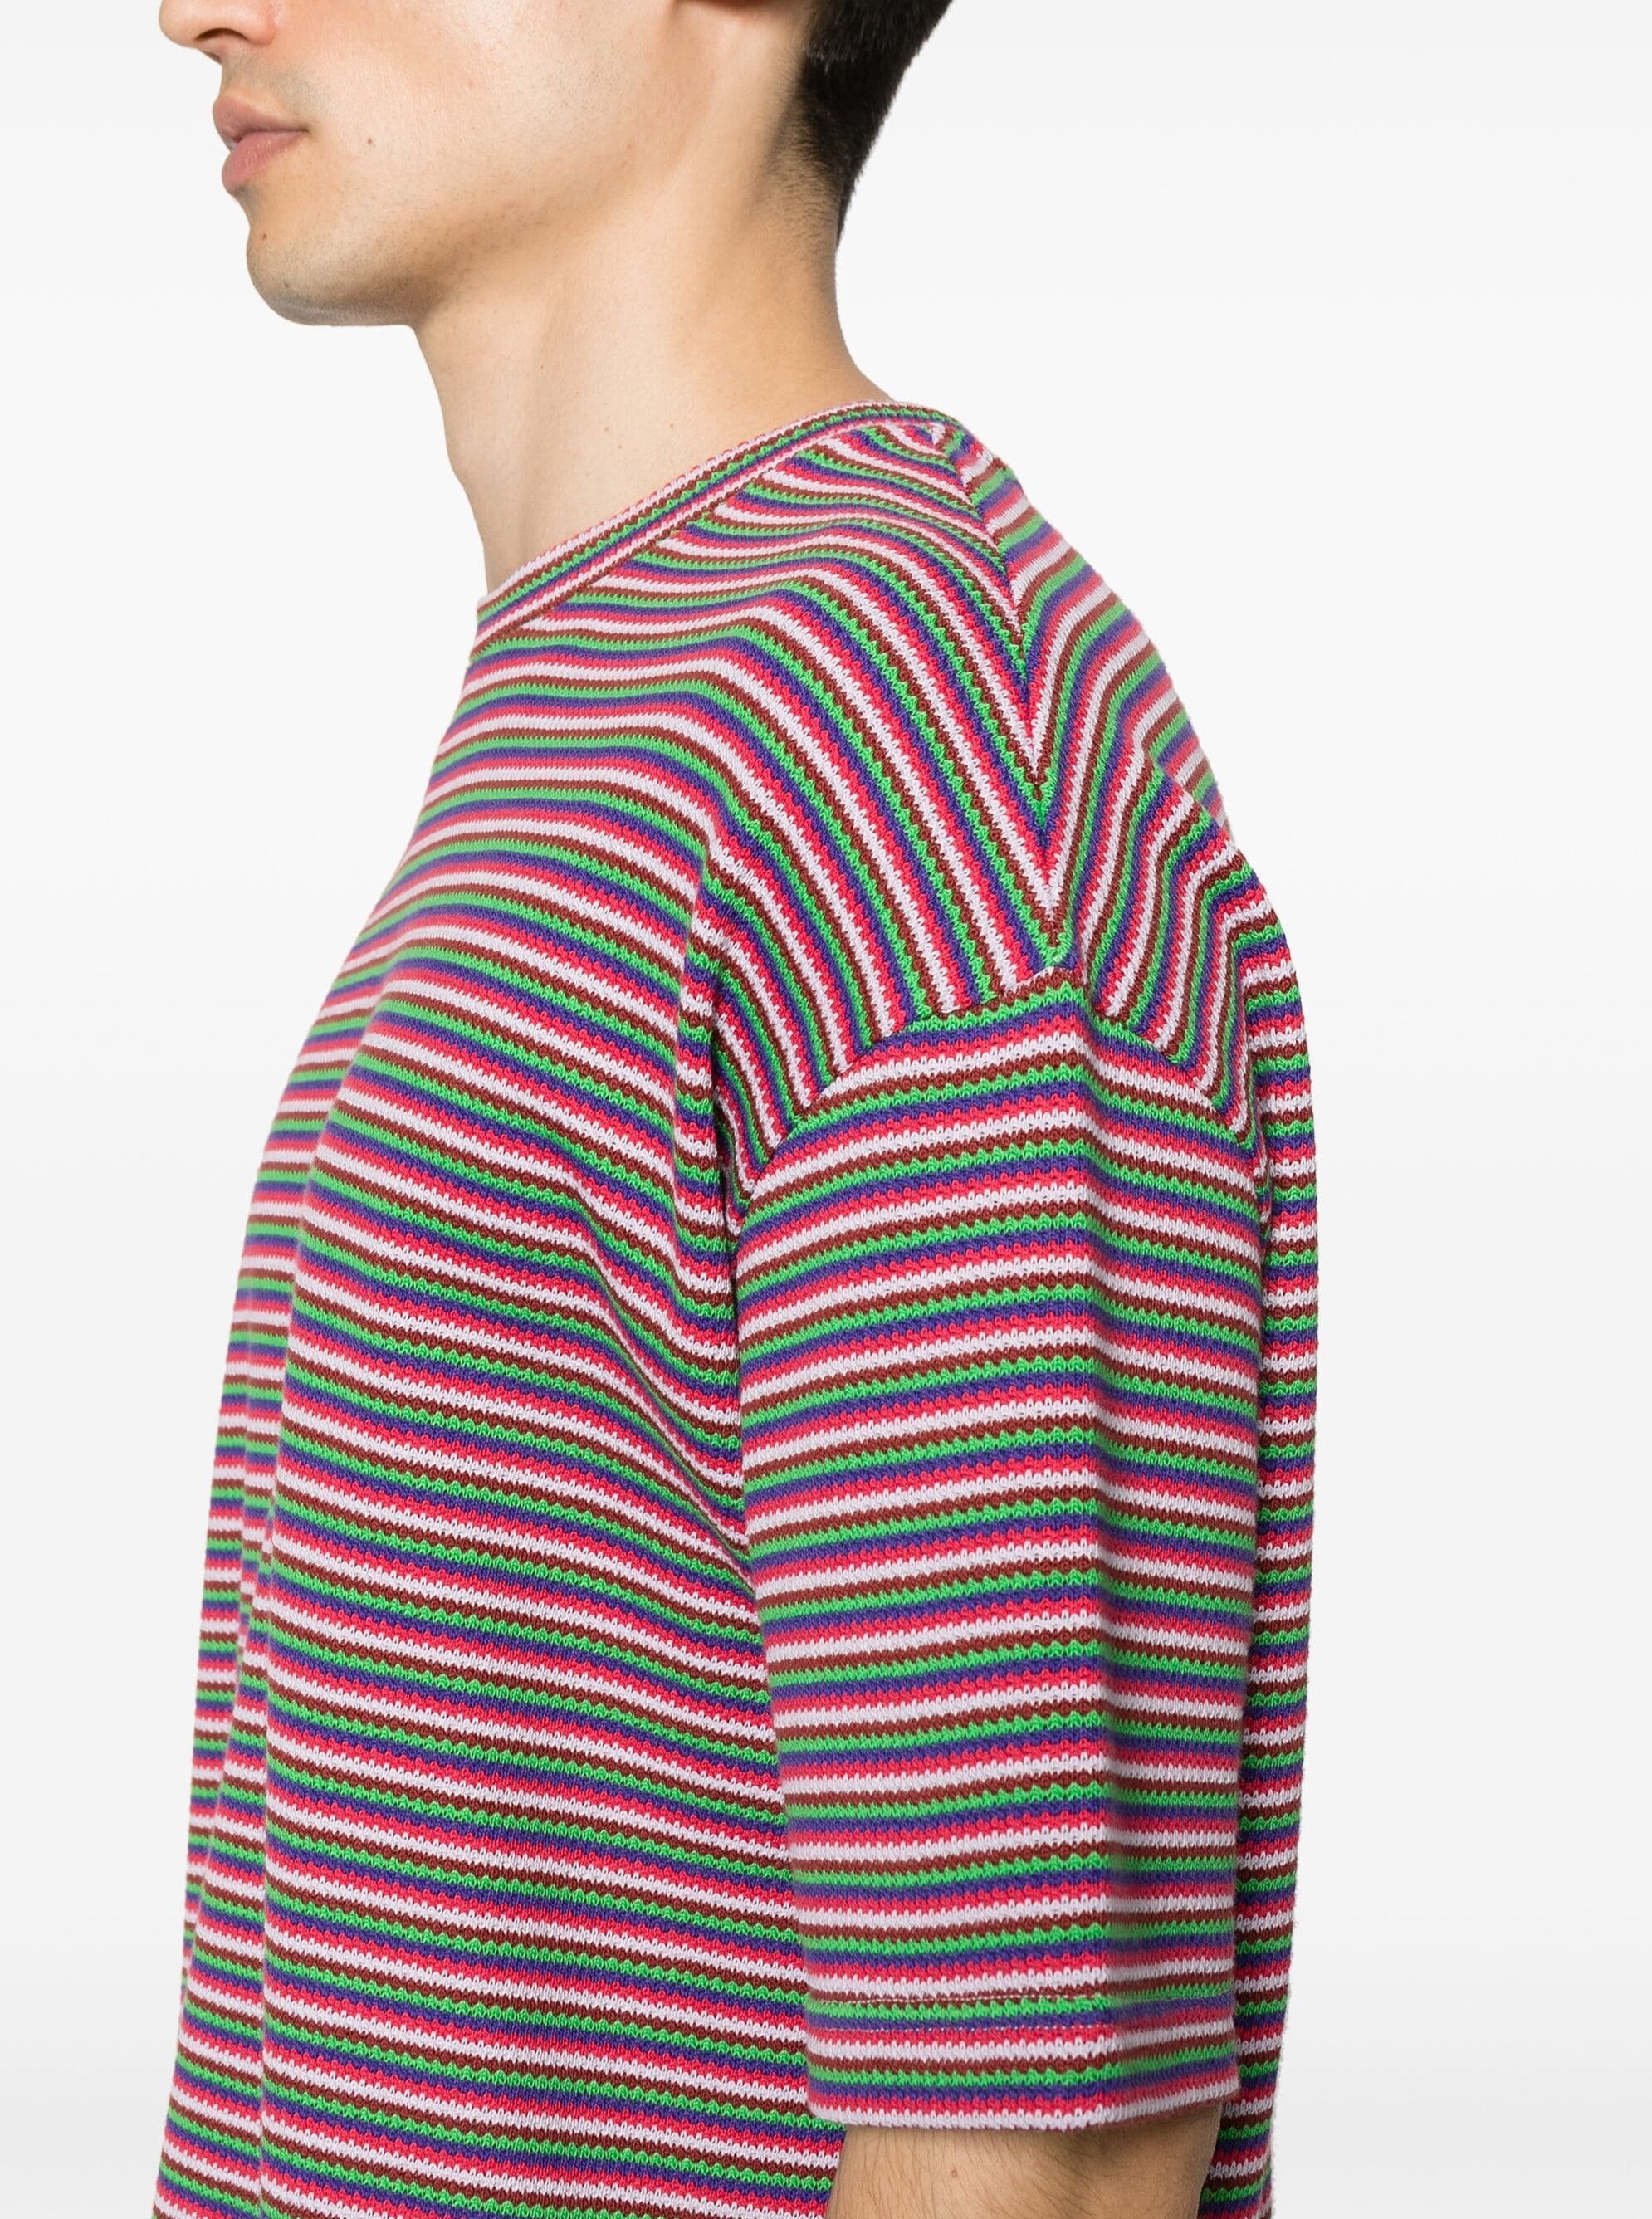 A.P.C Knitted Stripe T-shirt